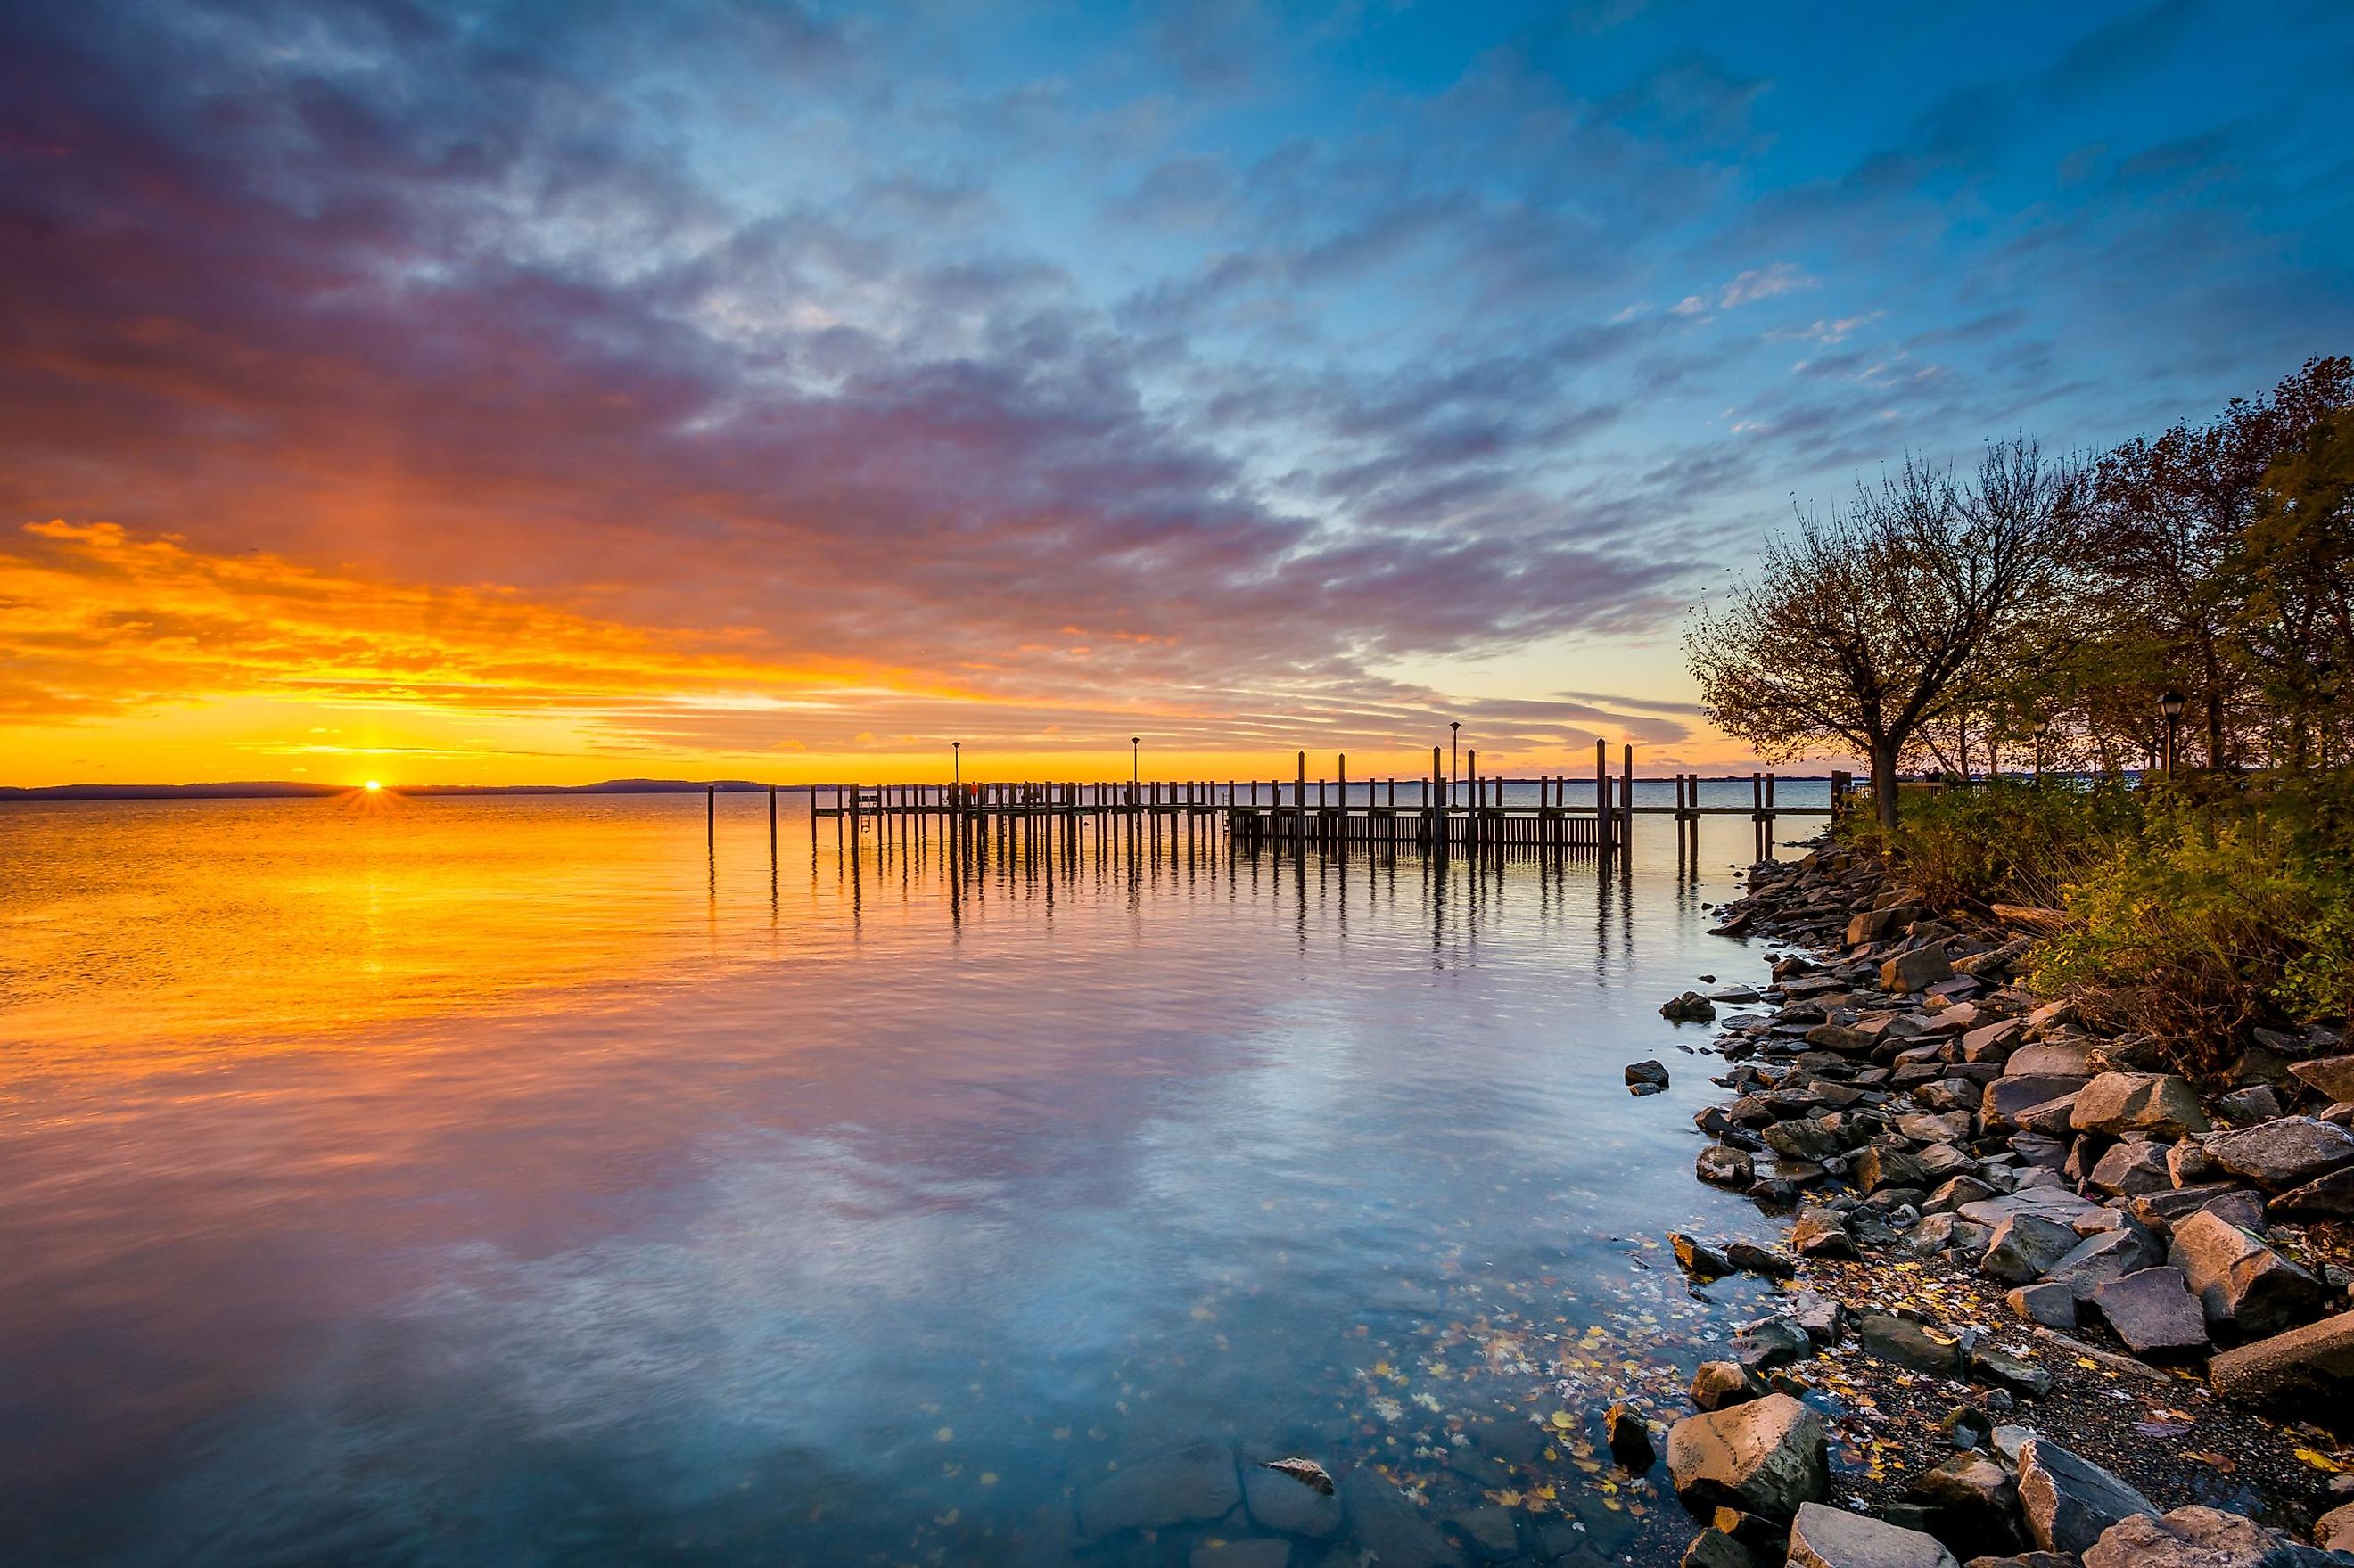 Sunrise over dock and the Chesapeake Bay, in Havre de Grace, Maryland.